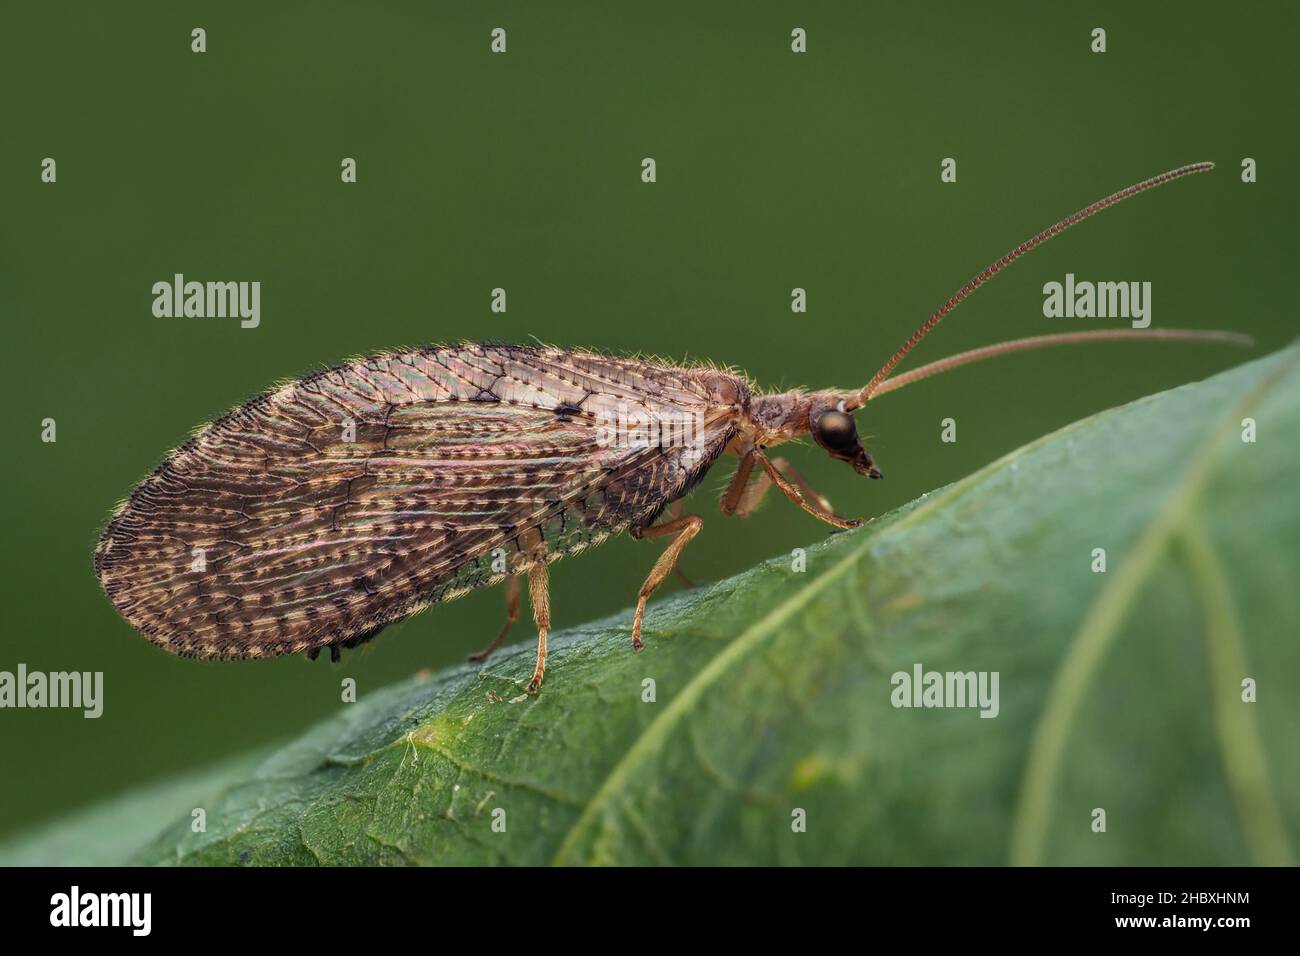 Brown Lacewing perched on underside of leaf. Tipperary, Ireland Stock Photo